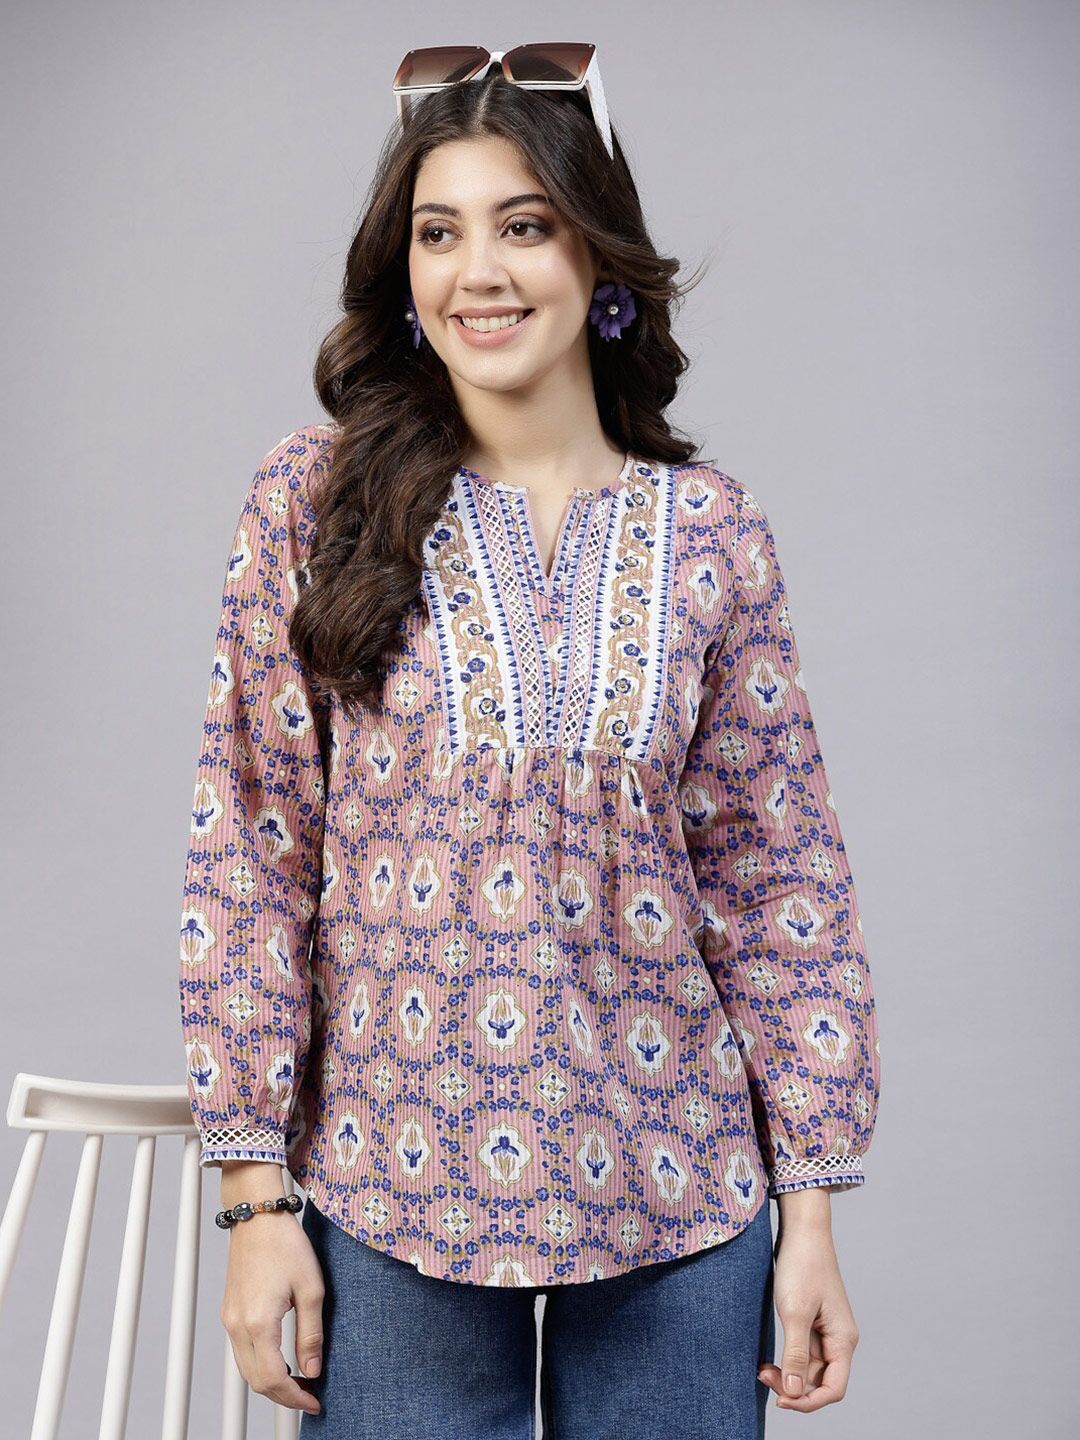 QOMN Pink Floral Cotton Top Price in India